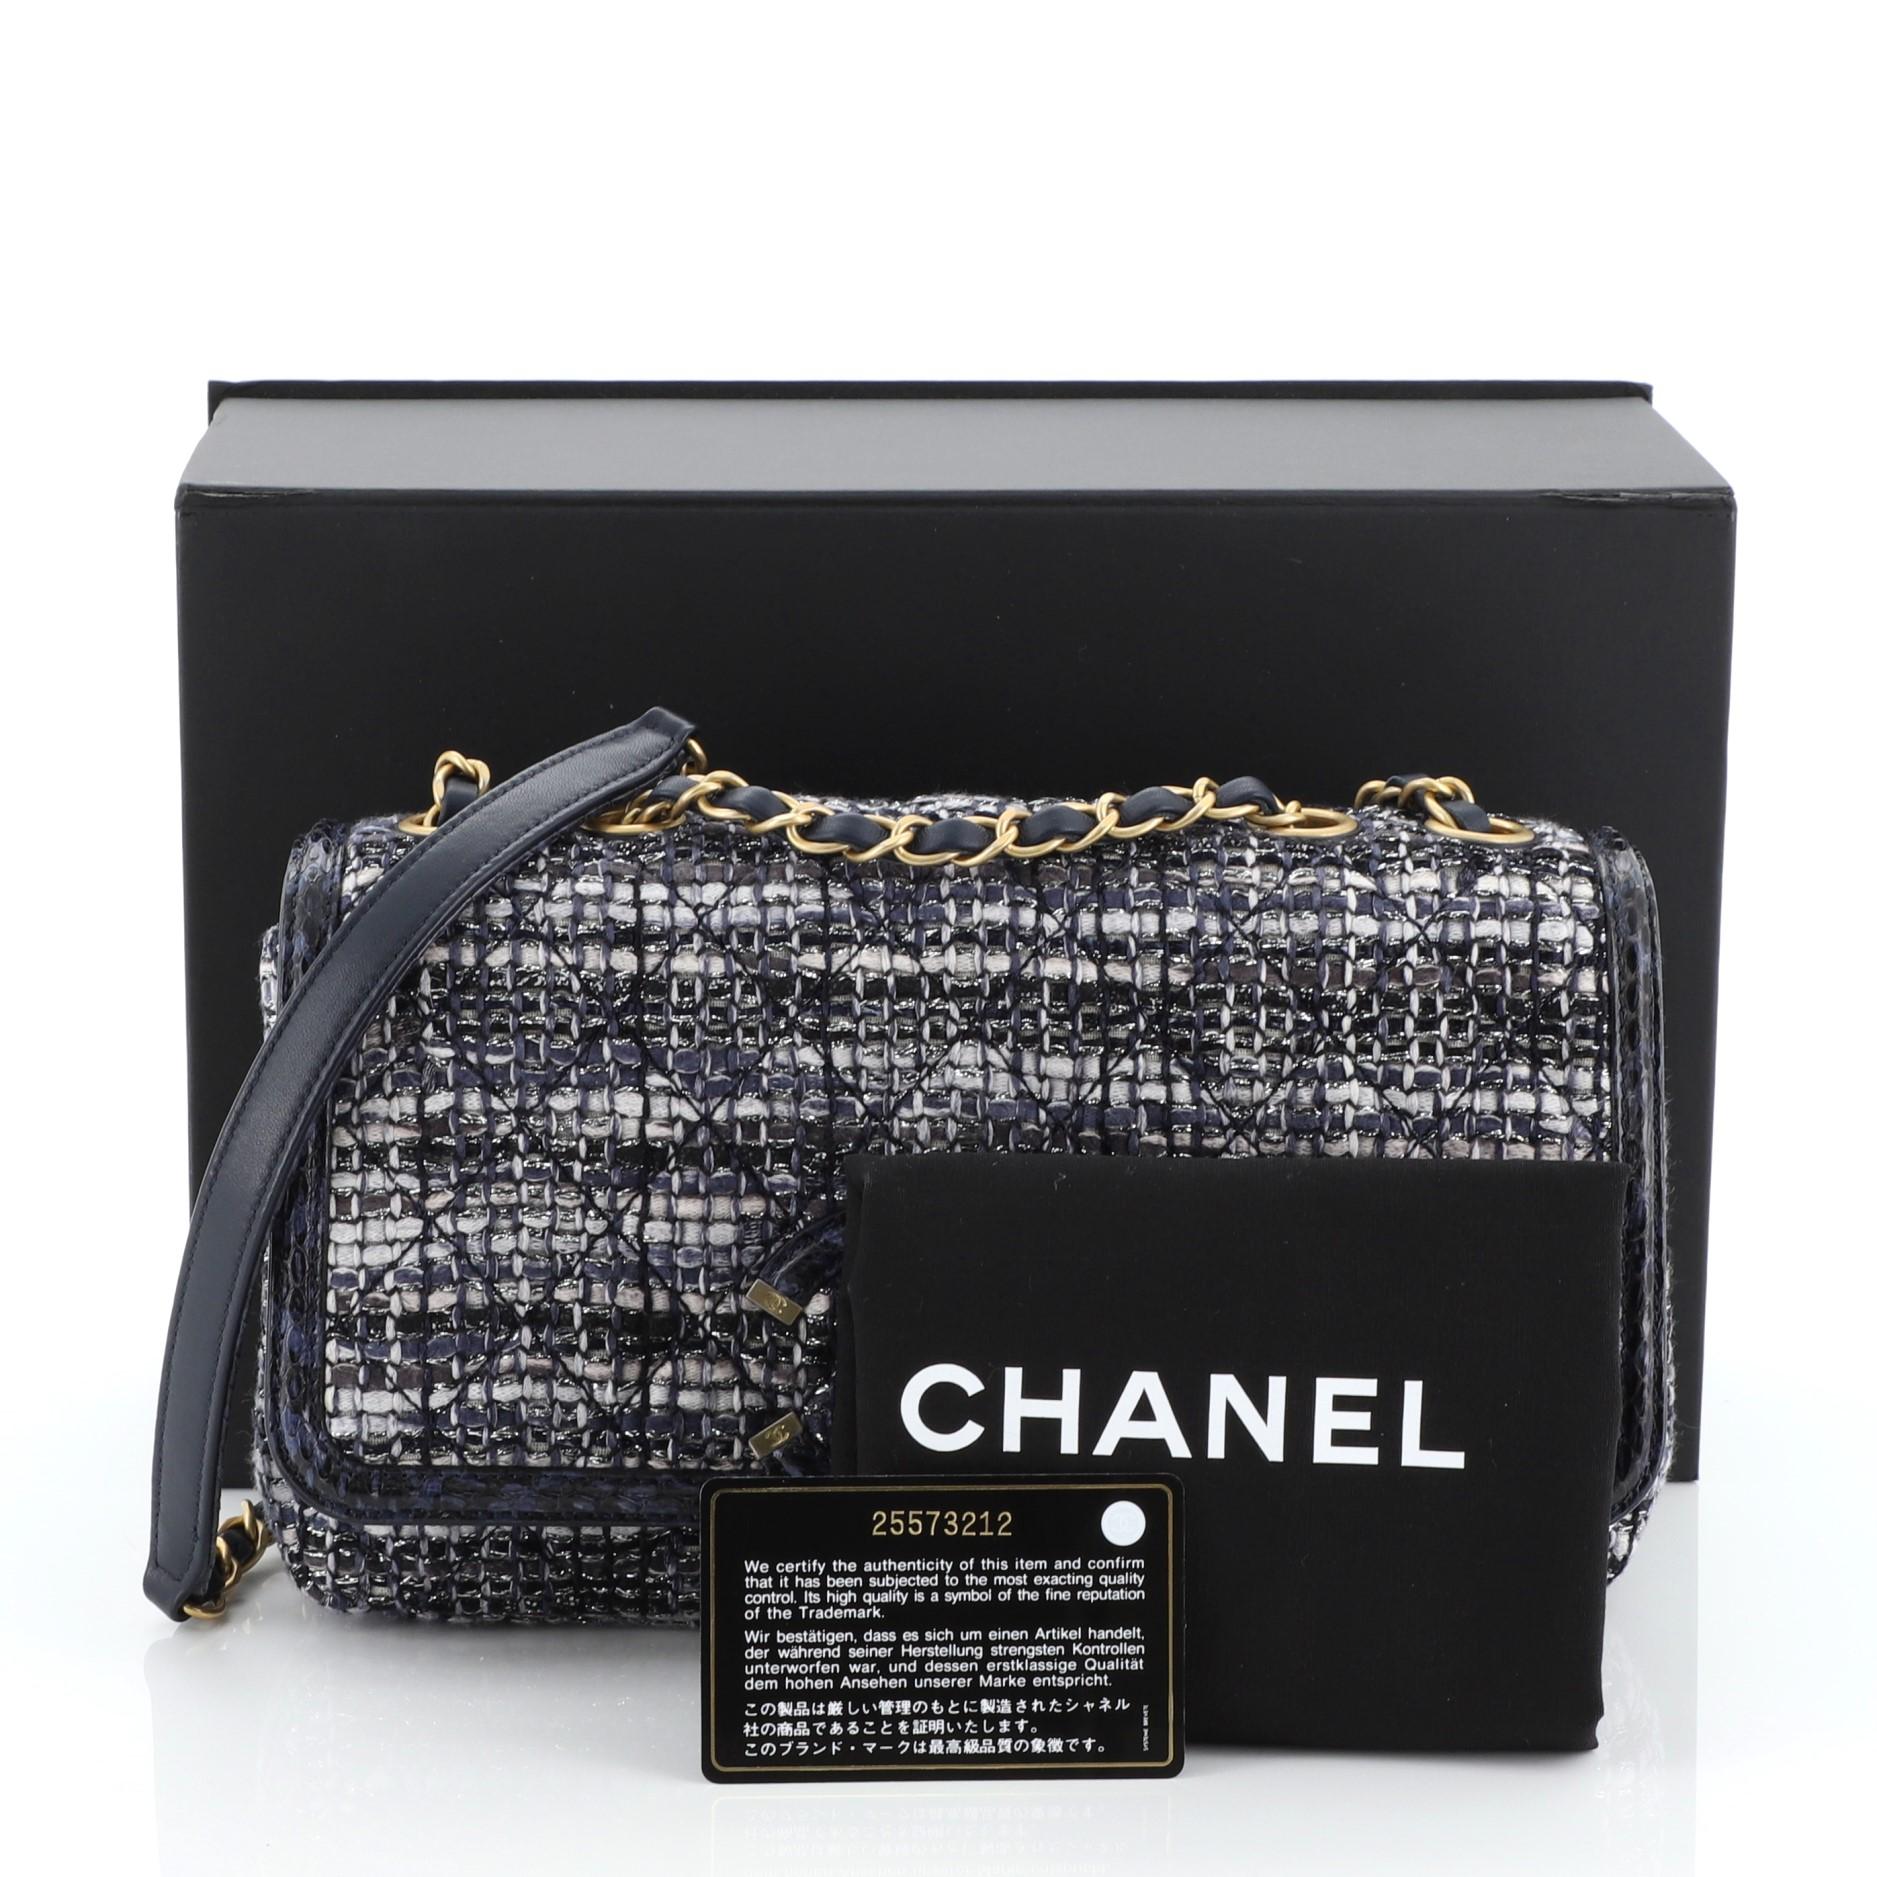 This Chanel Filigree Flap Bag Quilted Tweed with Watersnake Medium, crafted in blue quilted tweed with genuine watersnake, features woven-in leather chain strap, interlocking CC logo stitched on front, exterior back slip pocket and aged gold-tone